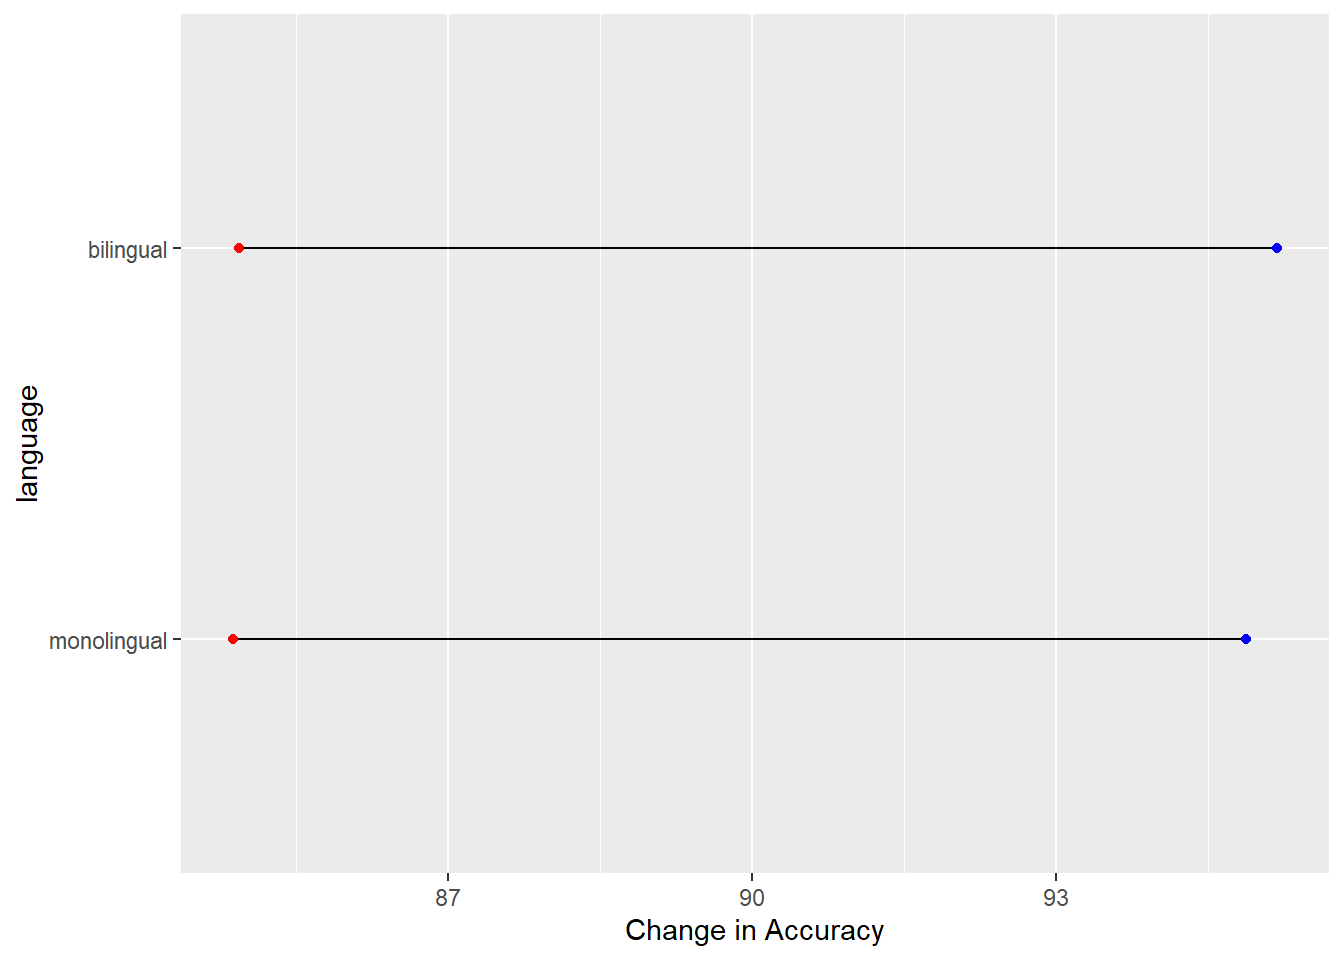 A dumbbell plot of change in Average Accuracy from Non-word trials (red dots) to Word trials (blue dots) for monolingual and bilingual participants.